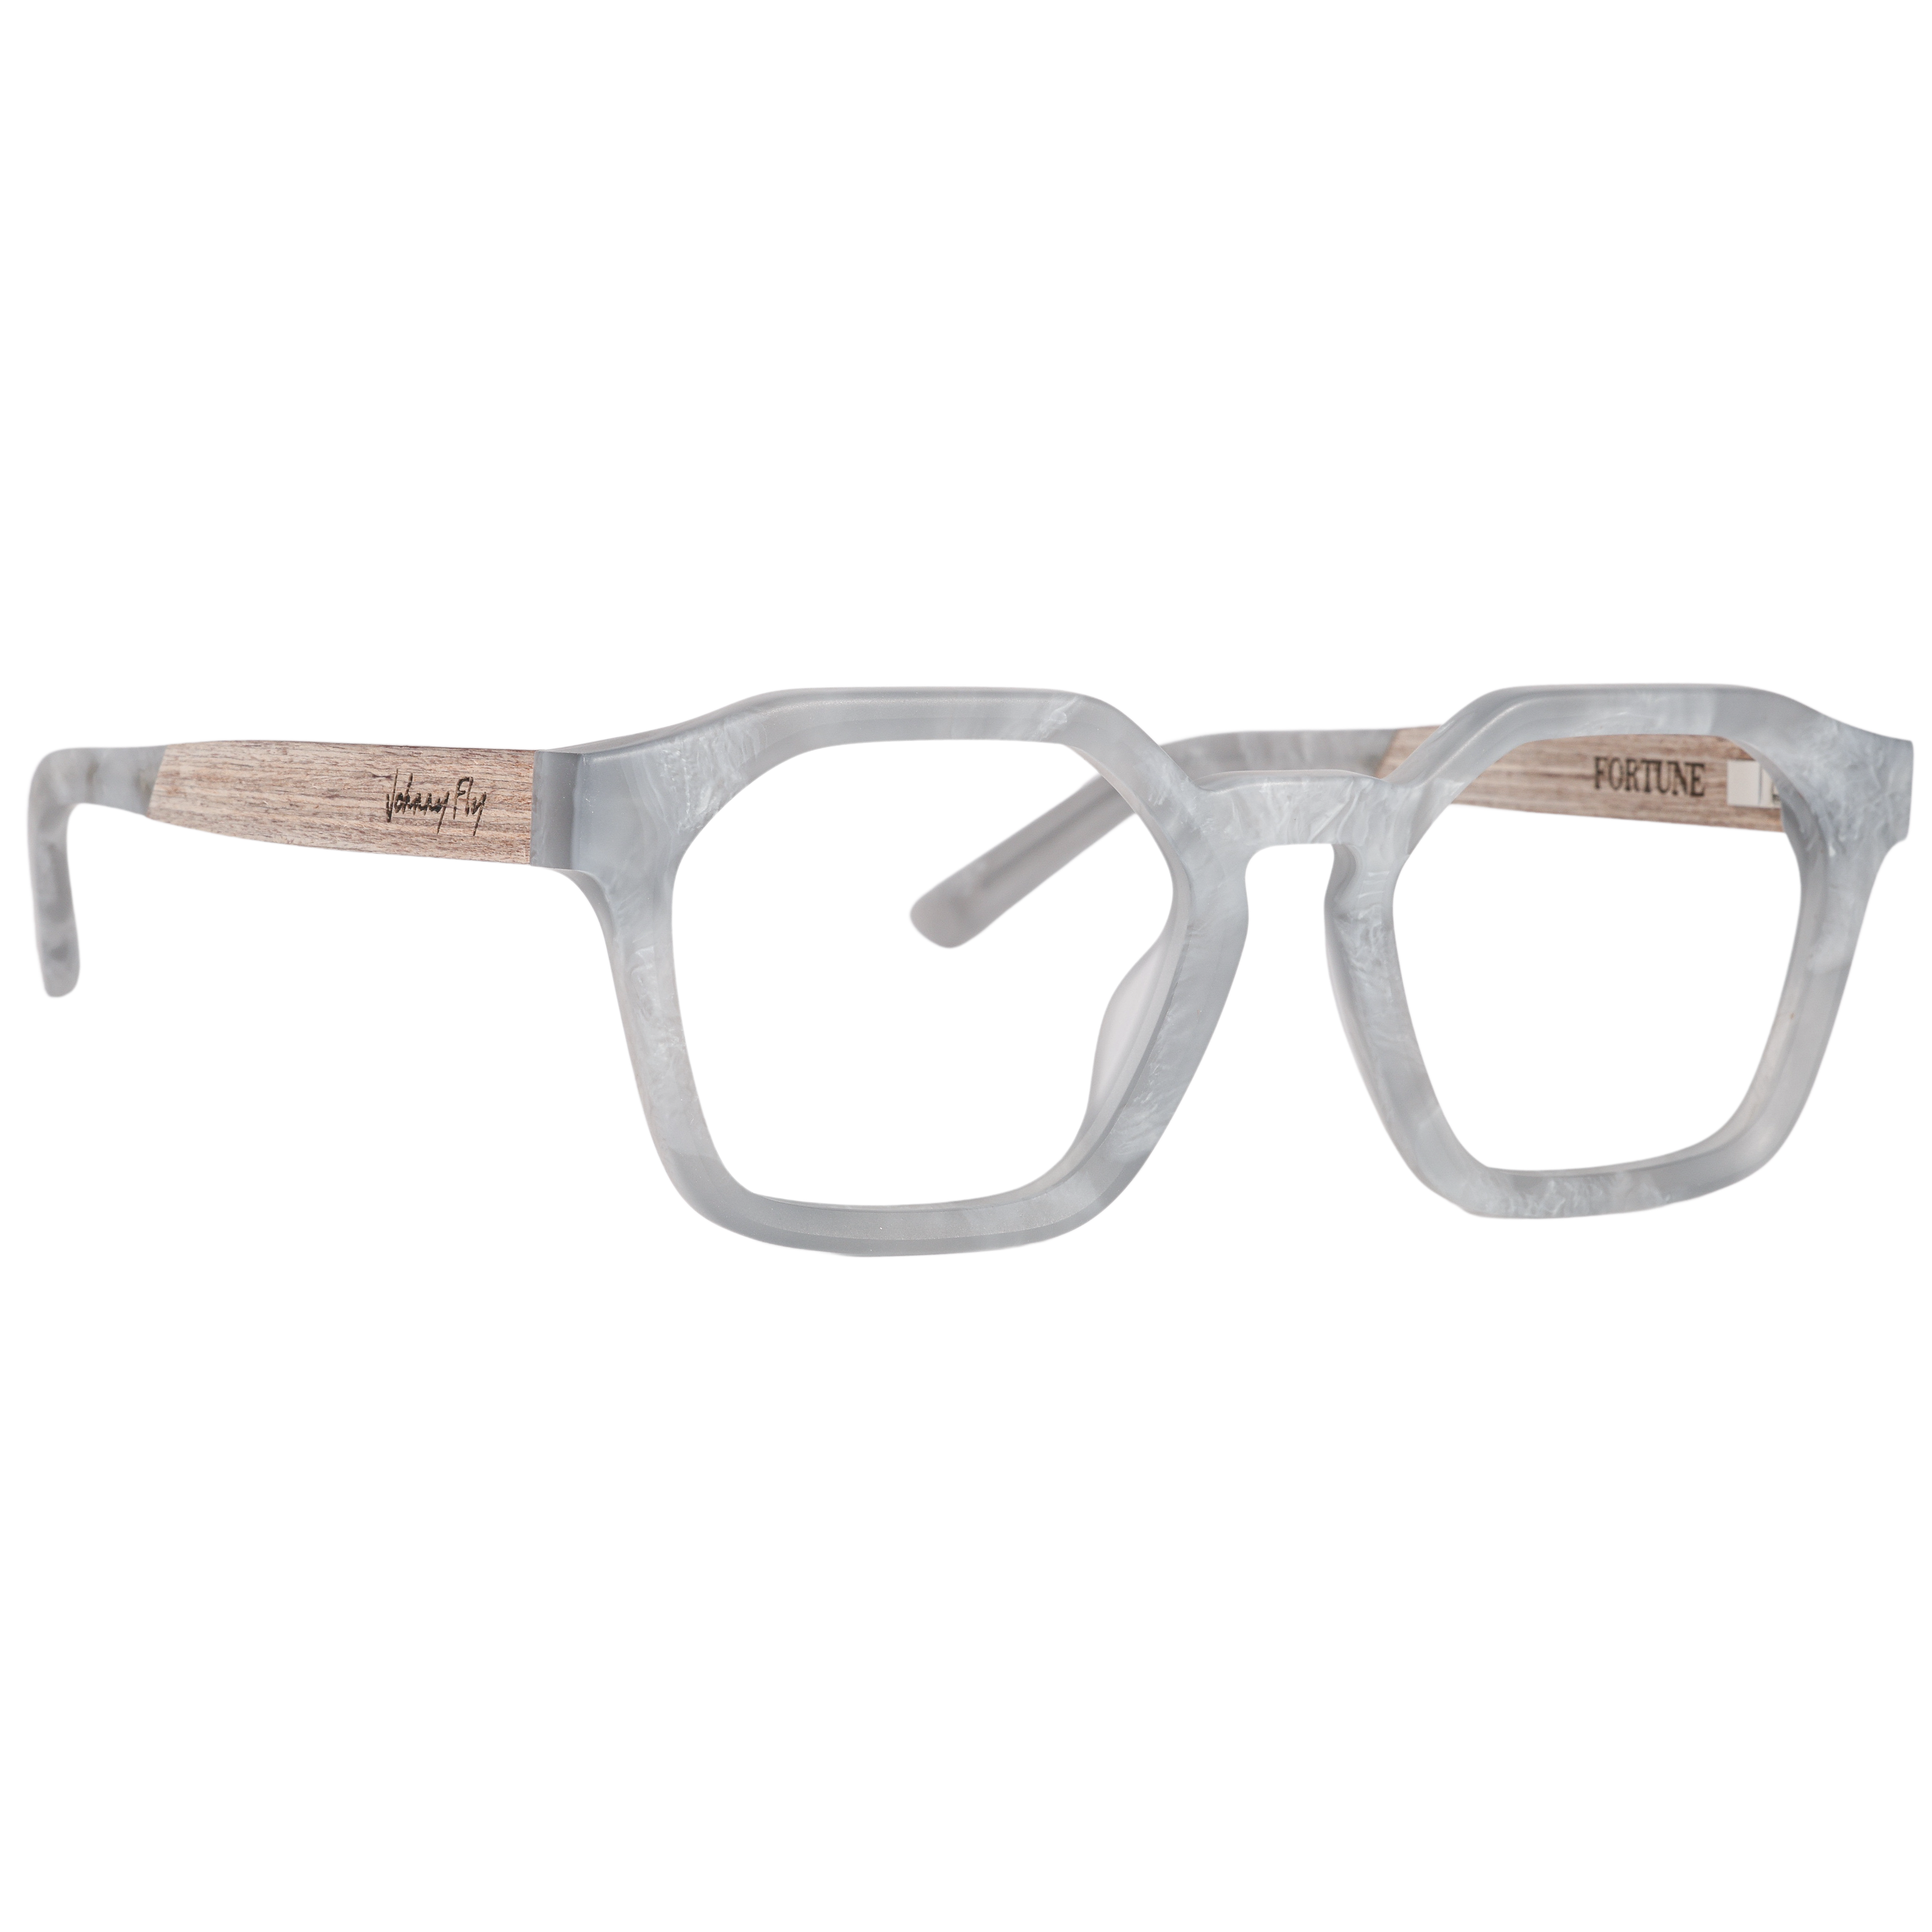 Fortune Astroid Eyeglasses by Johnny Fly #color_asteroid